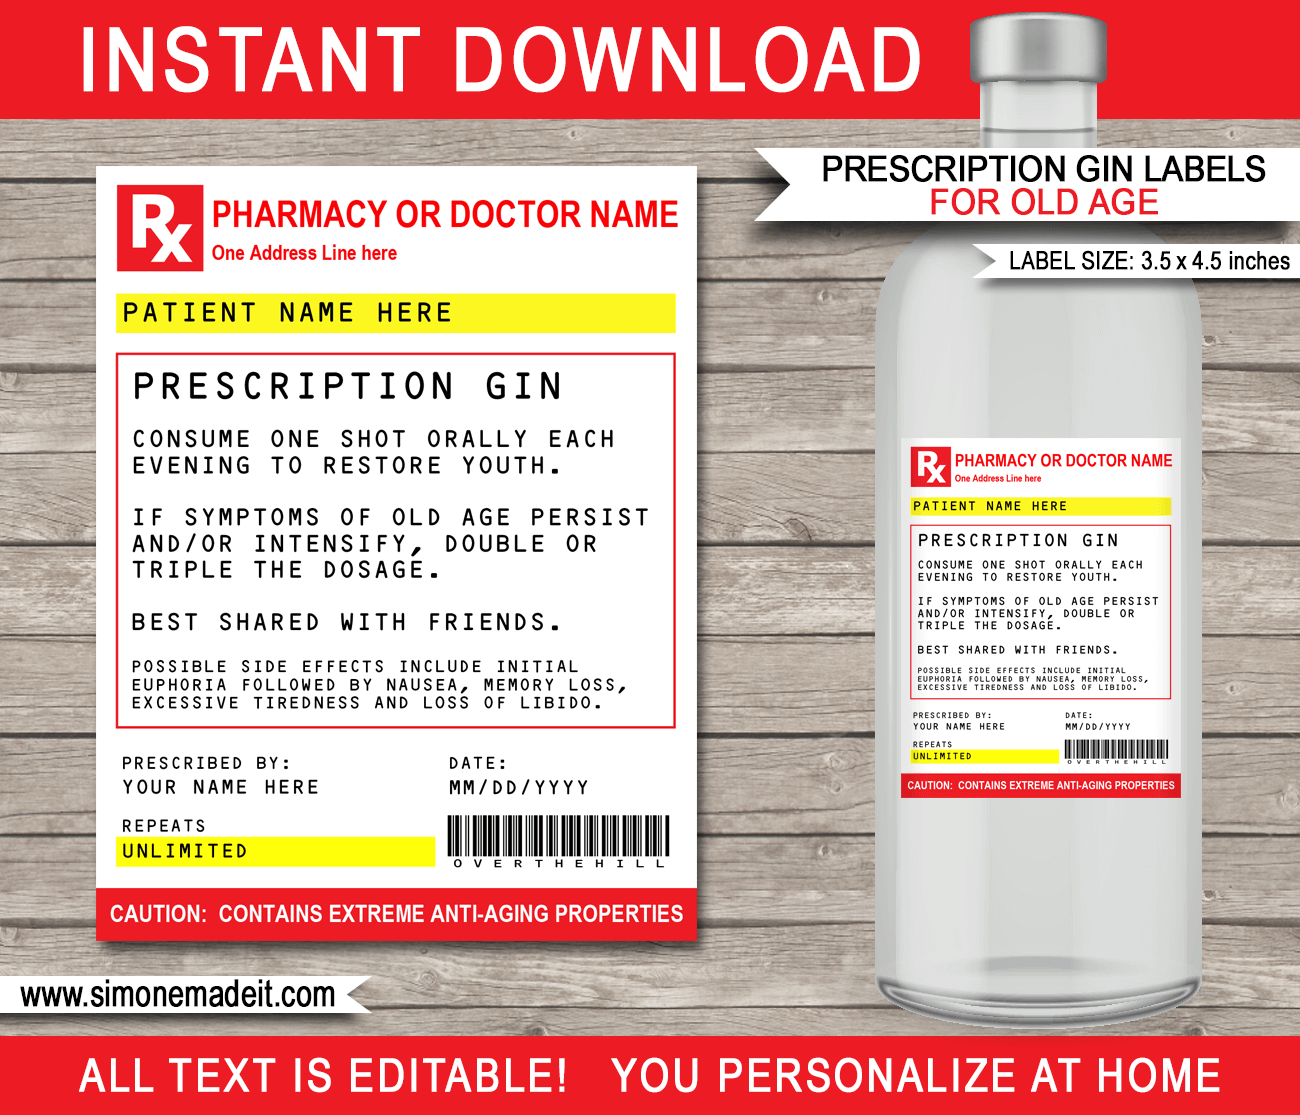 old-age-prescription-gin-labels-template-printable-fake-rx-pharmacy-label